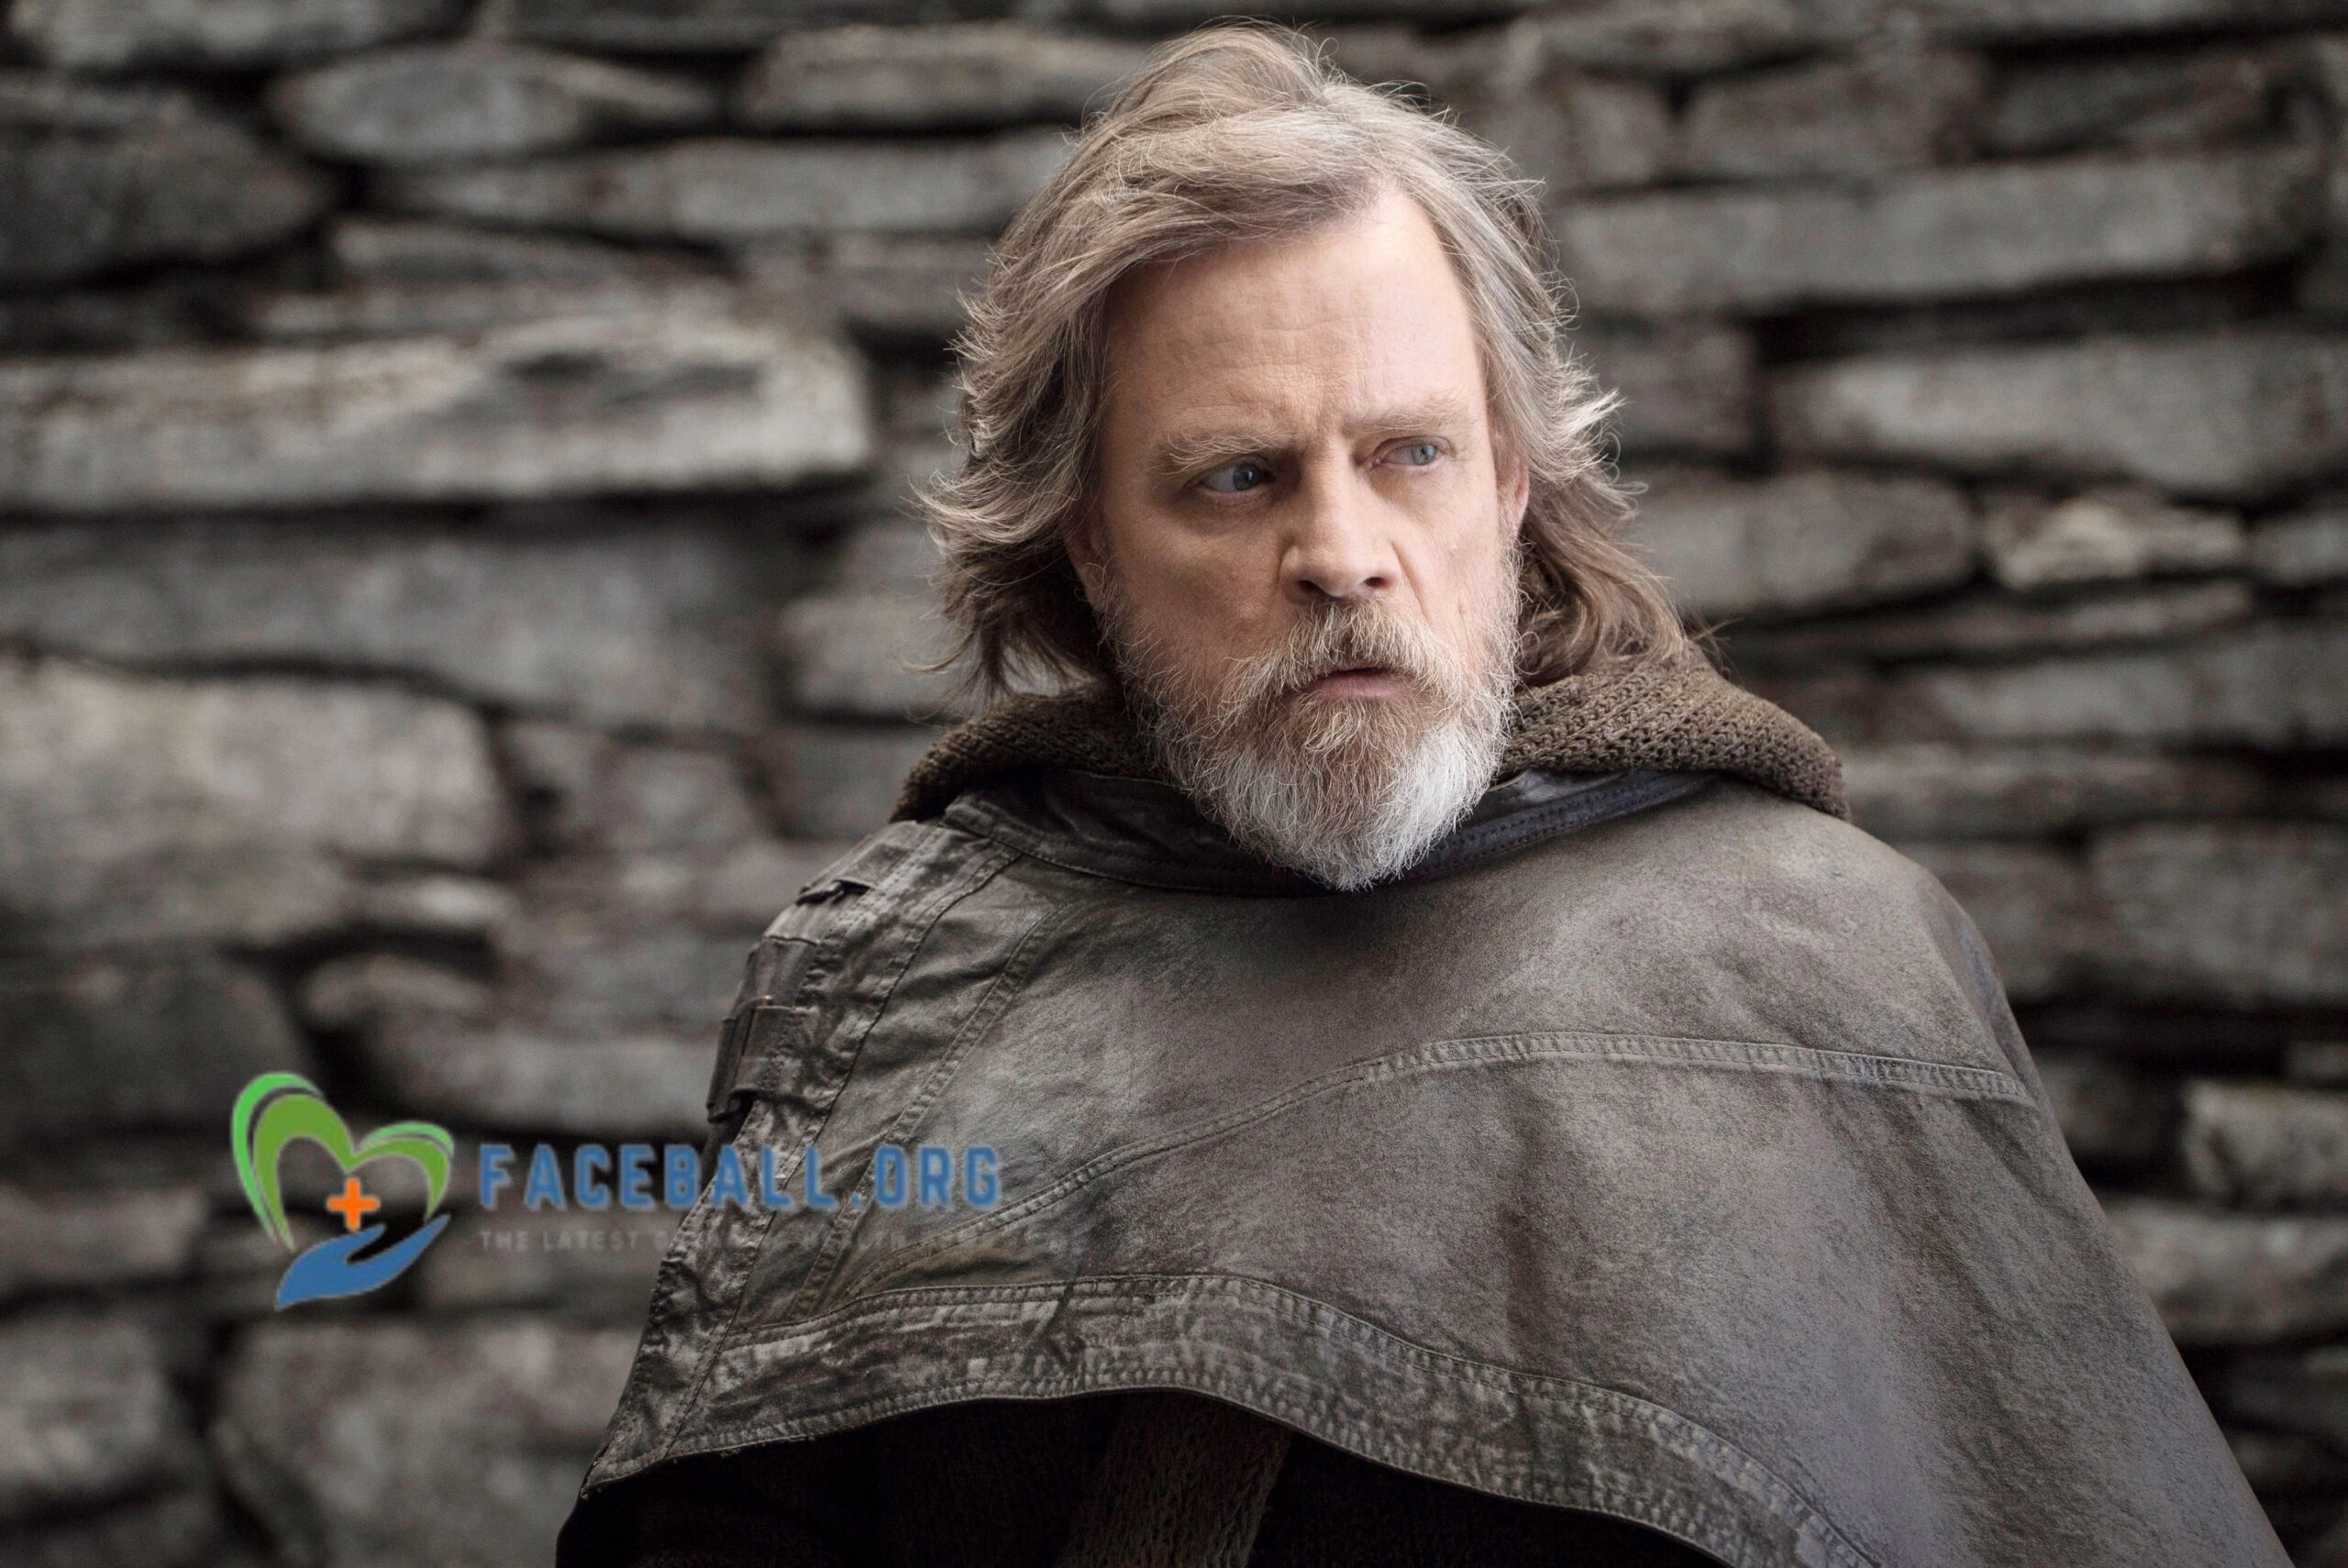 Mark Hamill Net Worth: Is Mark Hamill the richest Star Wars actor? Let’s Go!